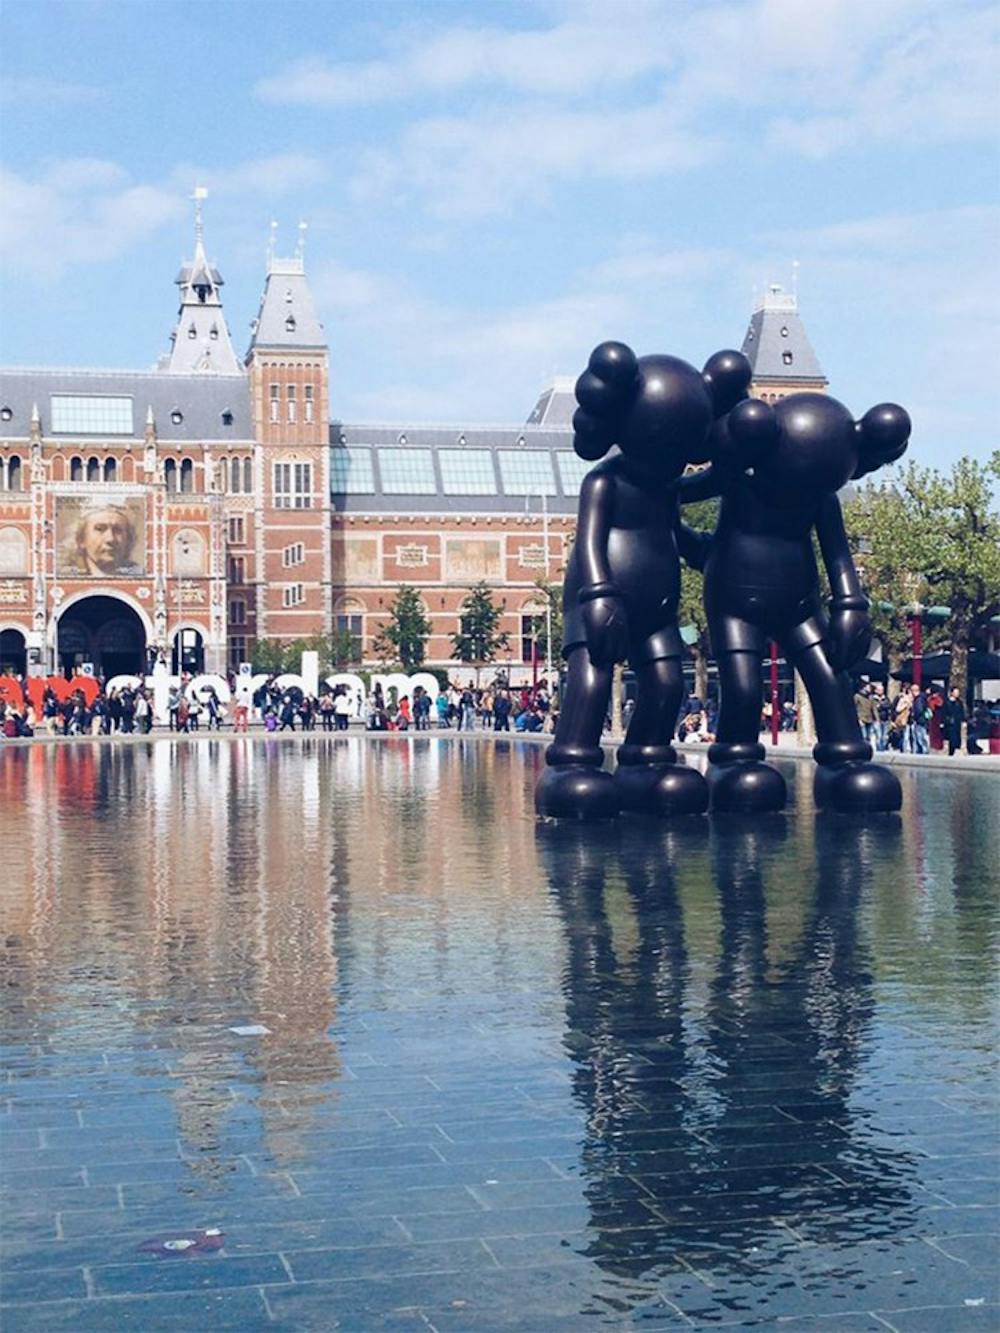 Museumplein, located in Amsterdam, features three major museums and a concert hall.